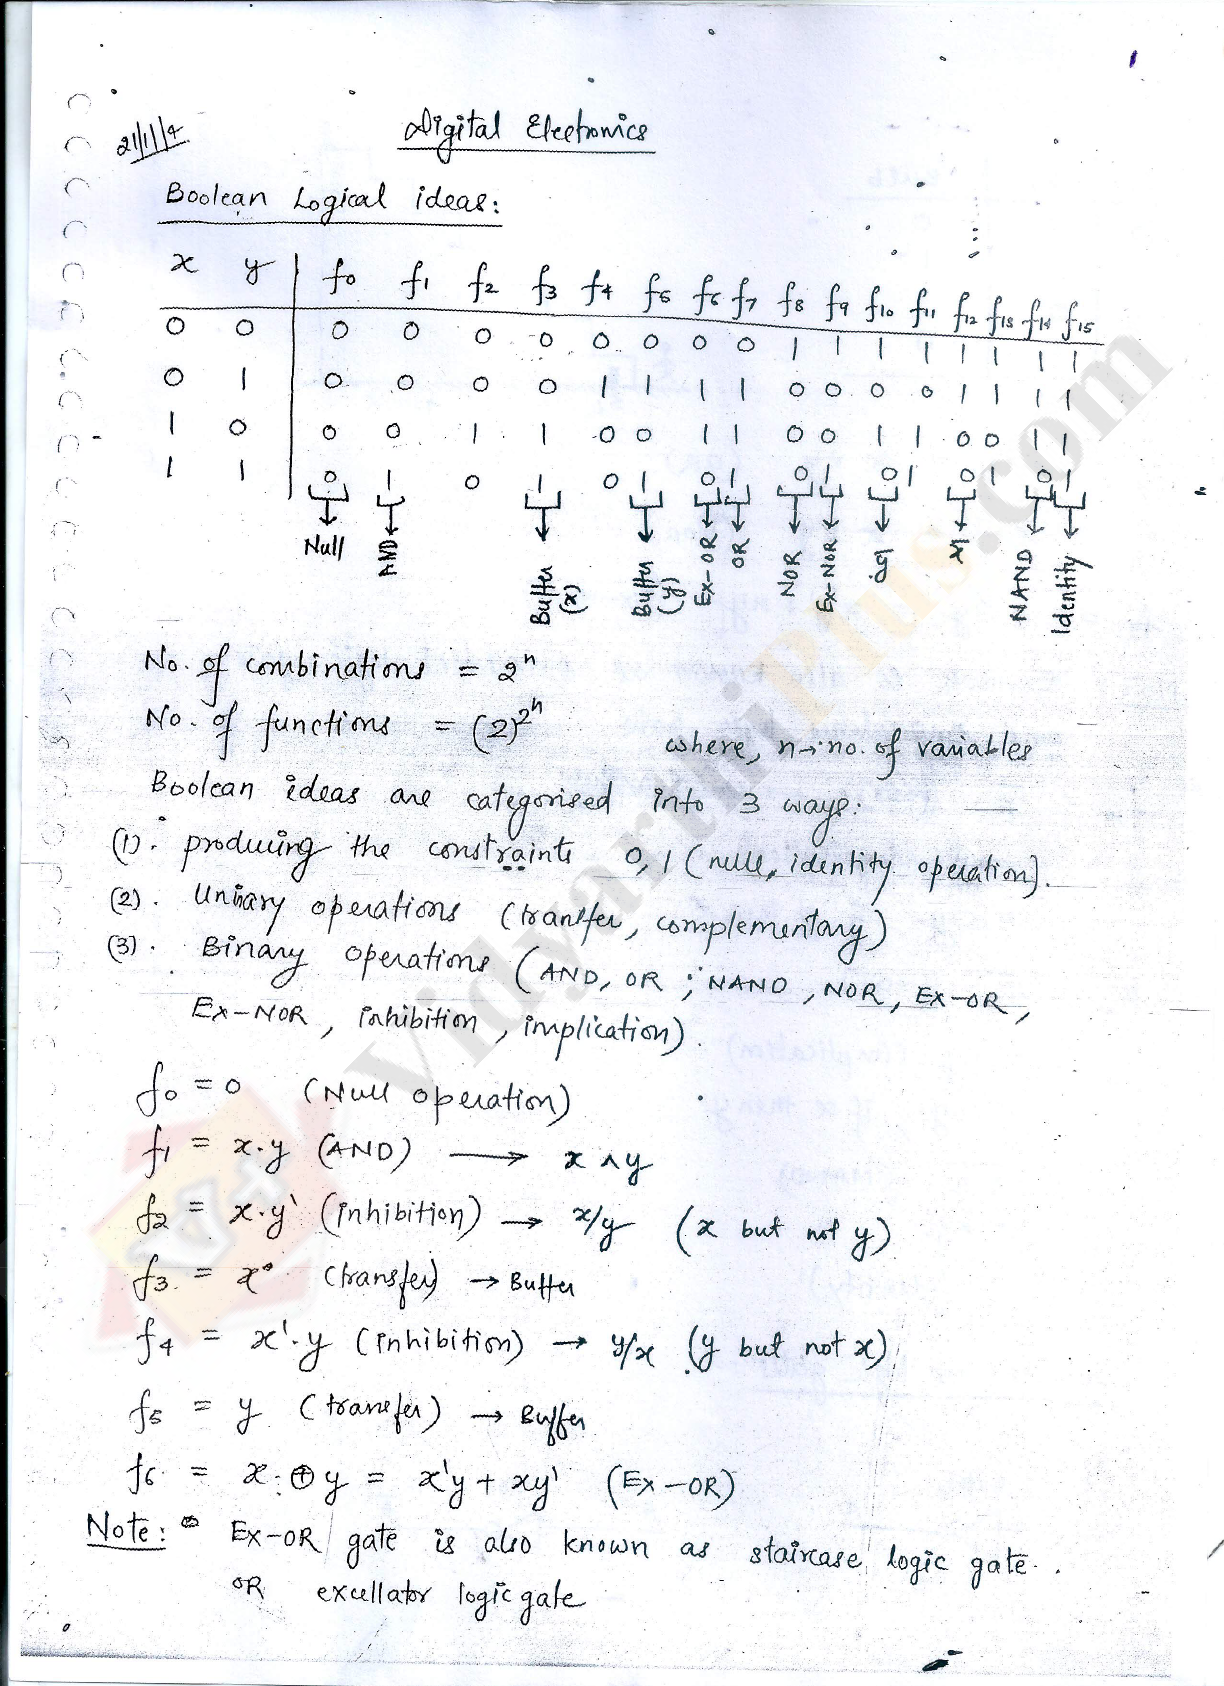 Lecture notes on digital electronics